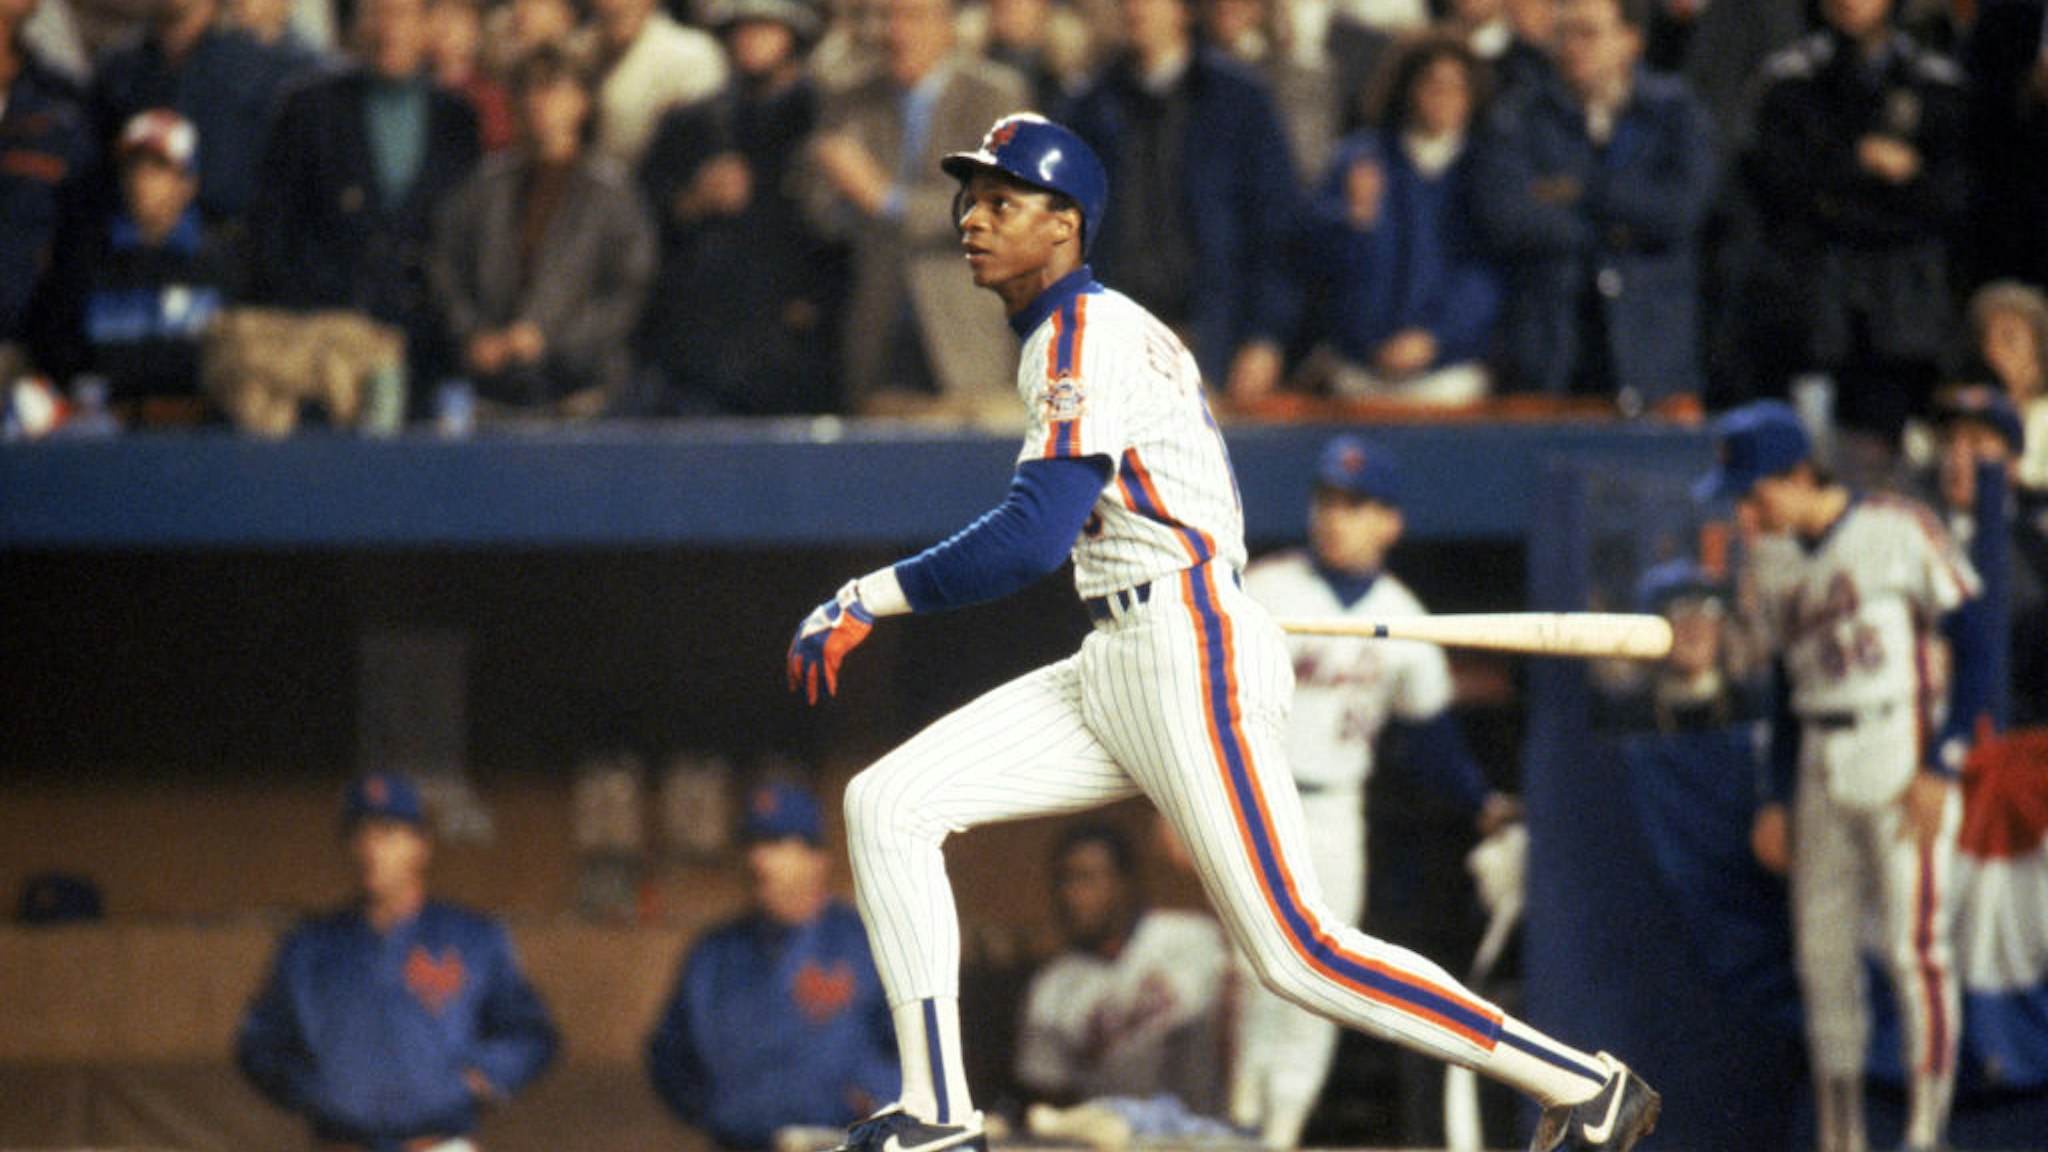 Right fielder Darryl Strawberry #18 of the New York Mets swings during game 7 of the 1986 World Series against the Boston Red Sox at Shea Stadium on October 27, 1986